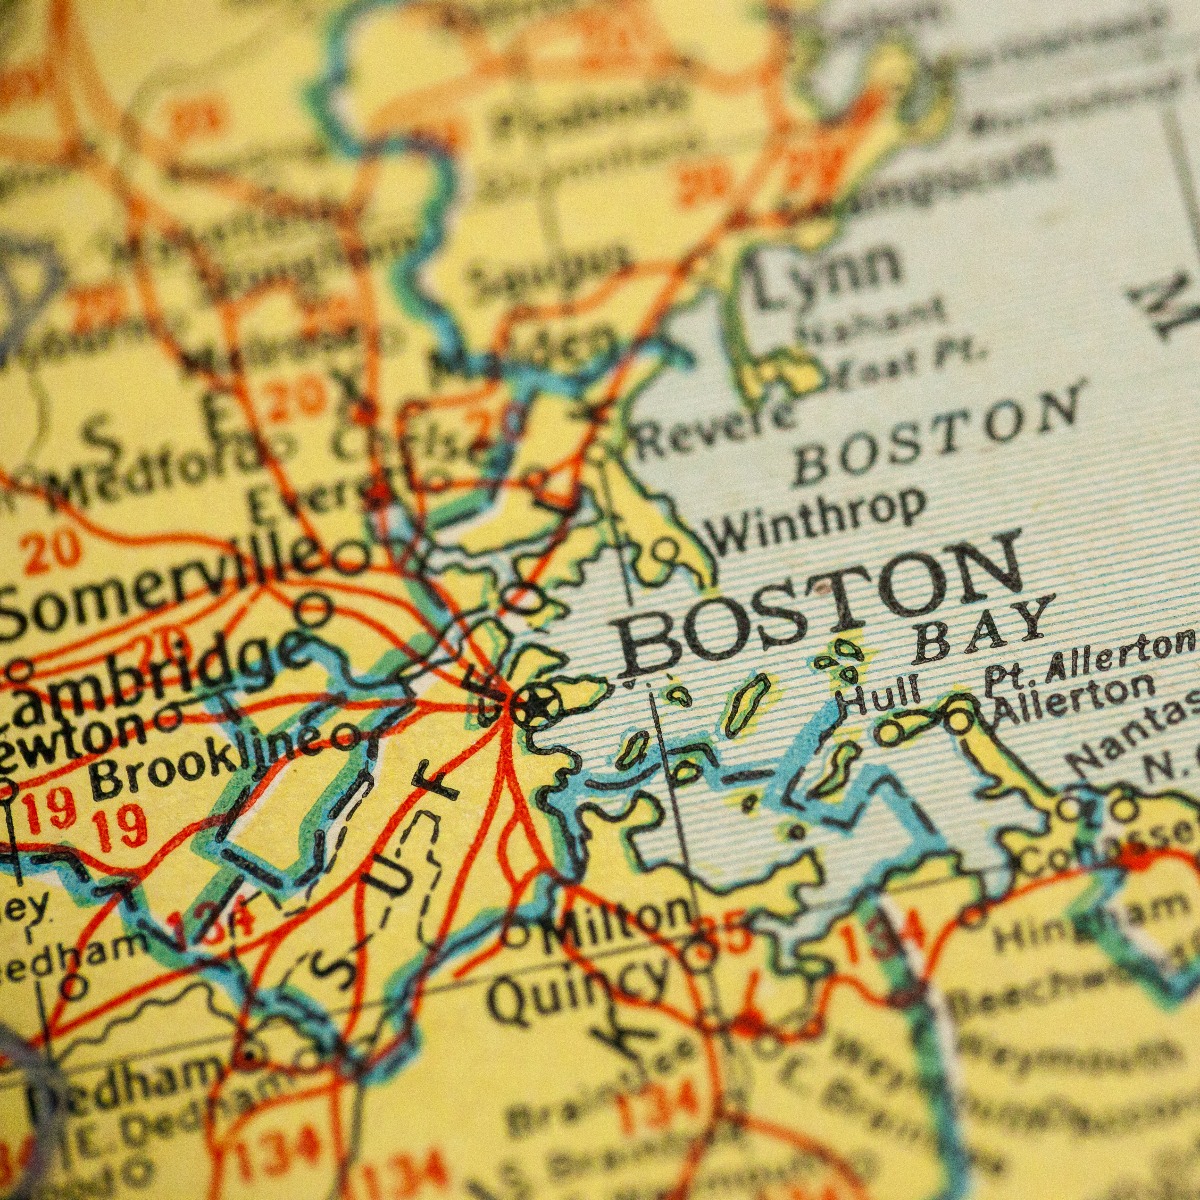 Boston, Massachusetts, is the focal point of an old map